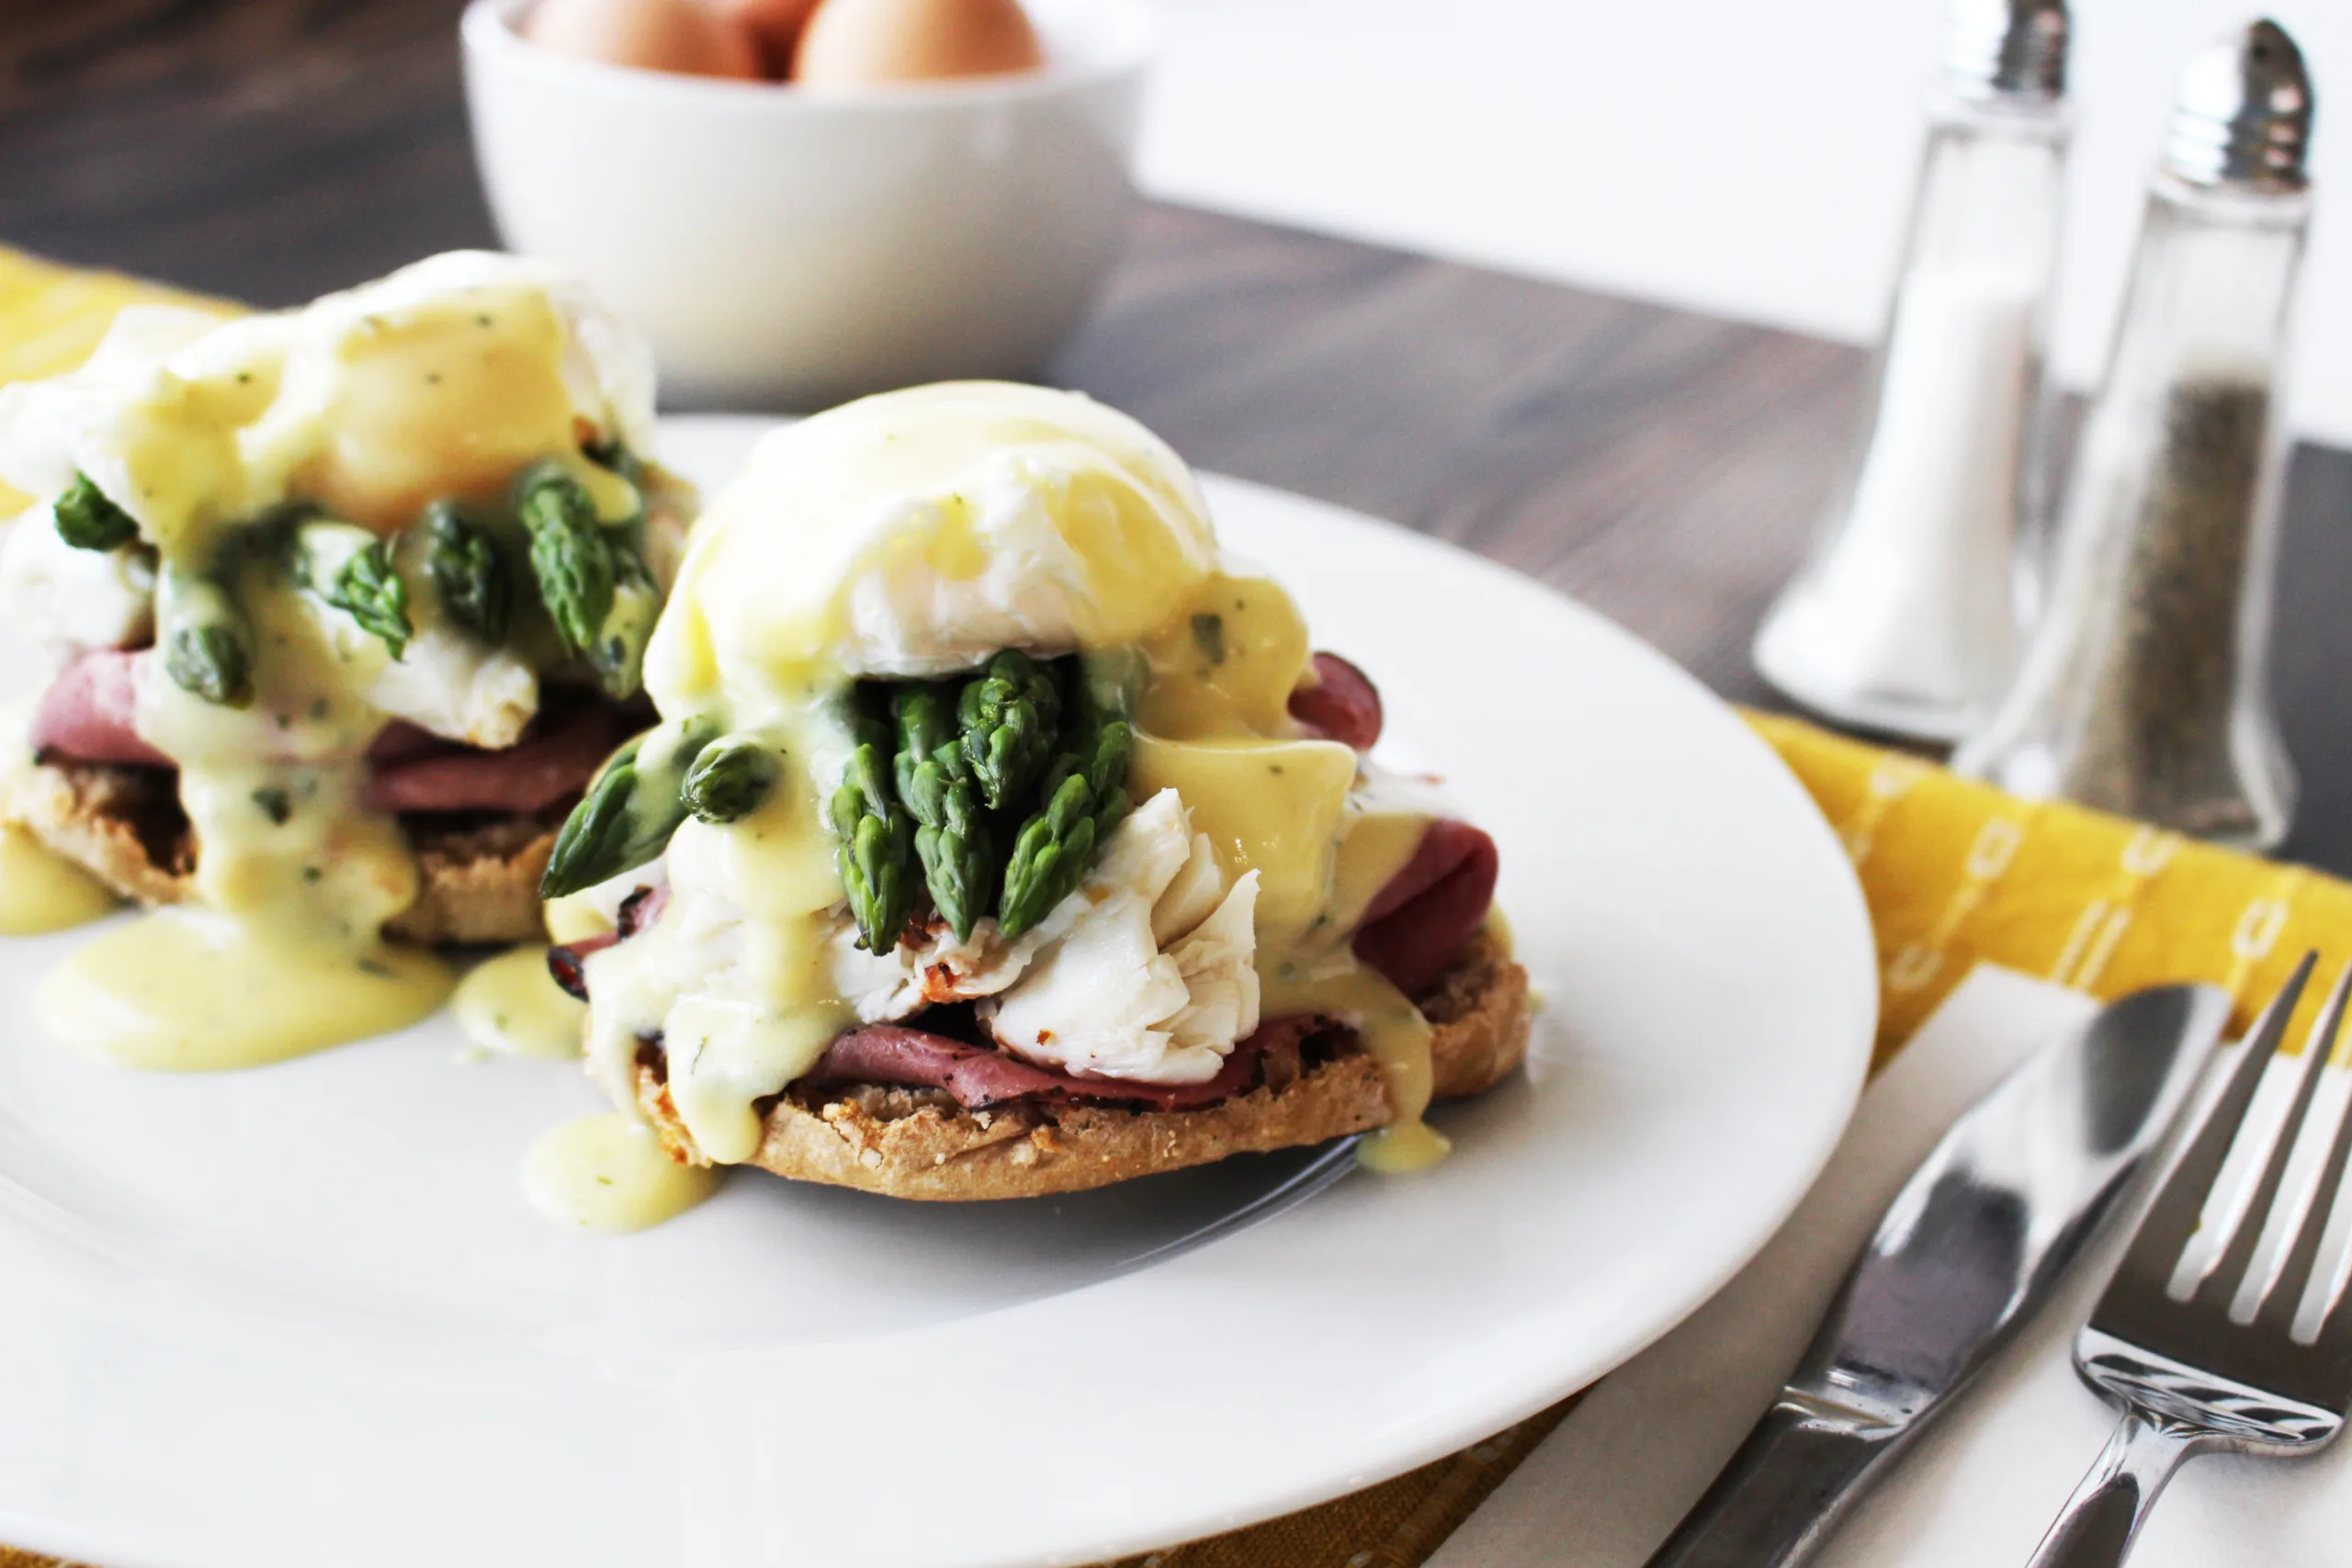 Crab & Asparagus Eggs Benedict the brunch bunch Recipes for this Favorite Mid-Morning Meal